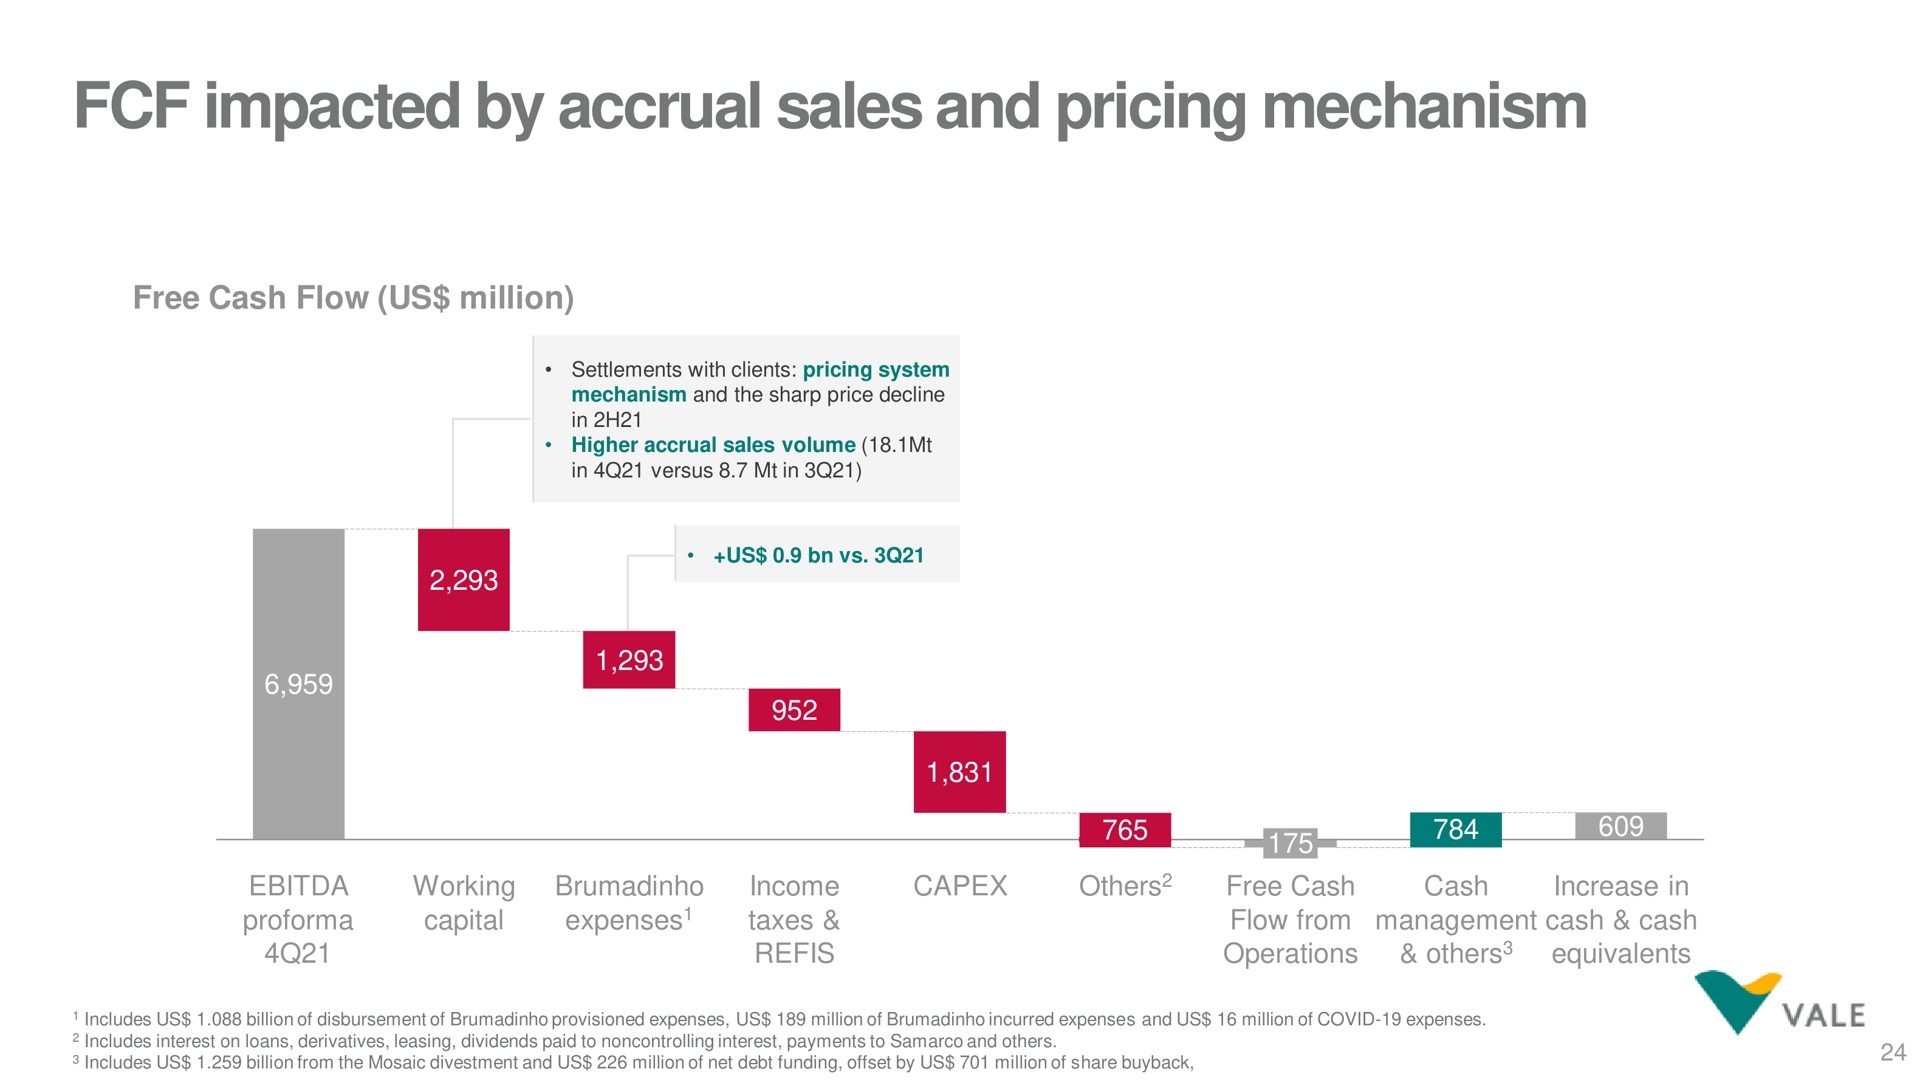 impacted by accrual sales and pricing mechanism | Vale